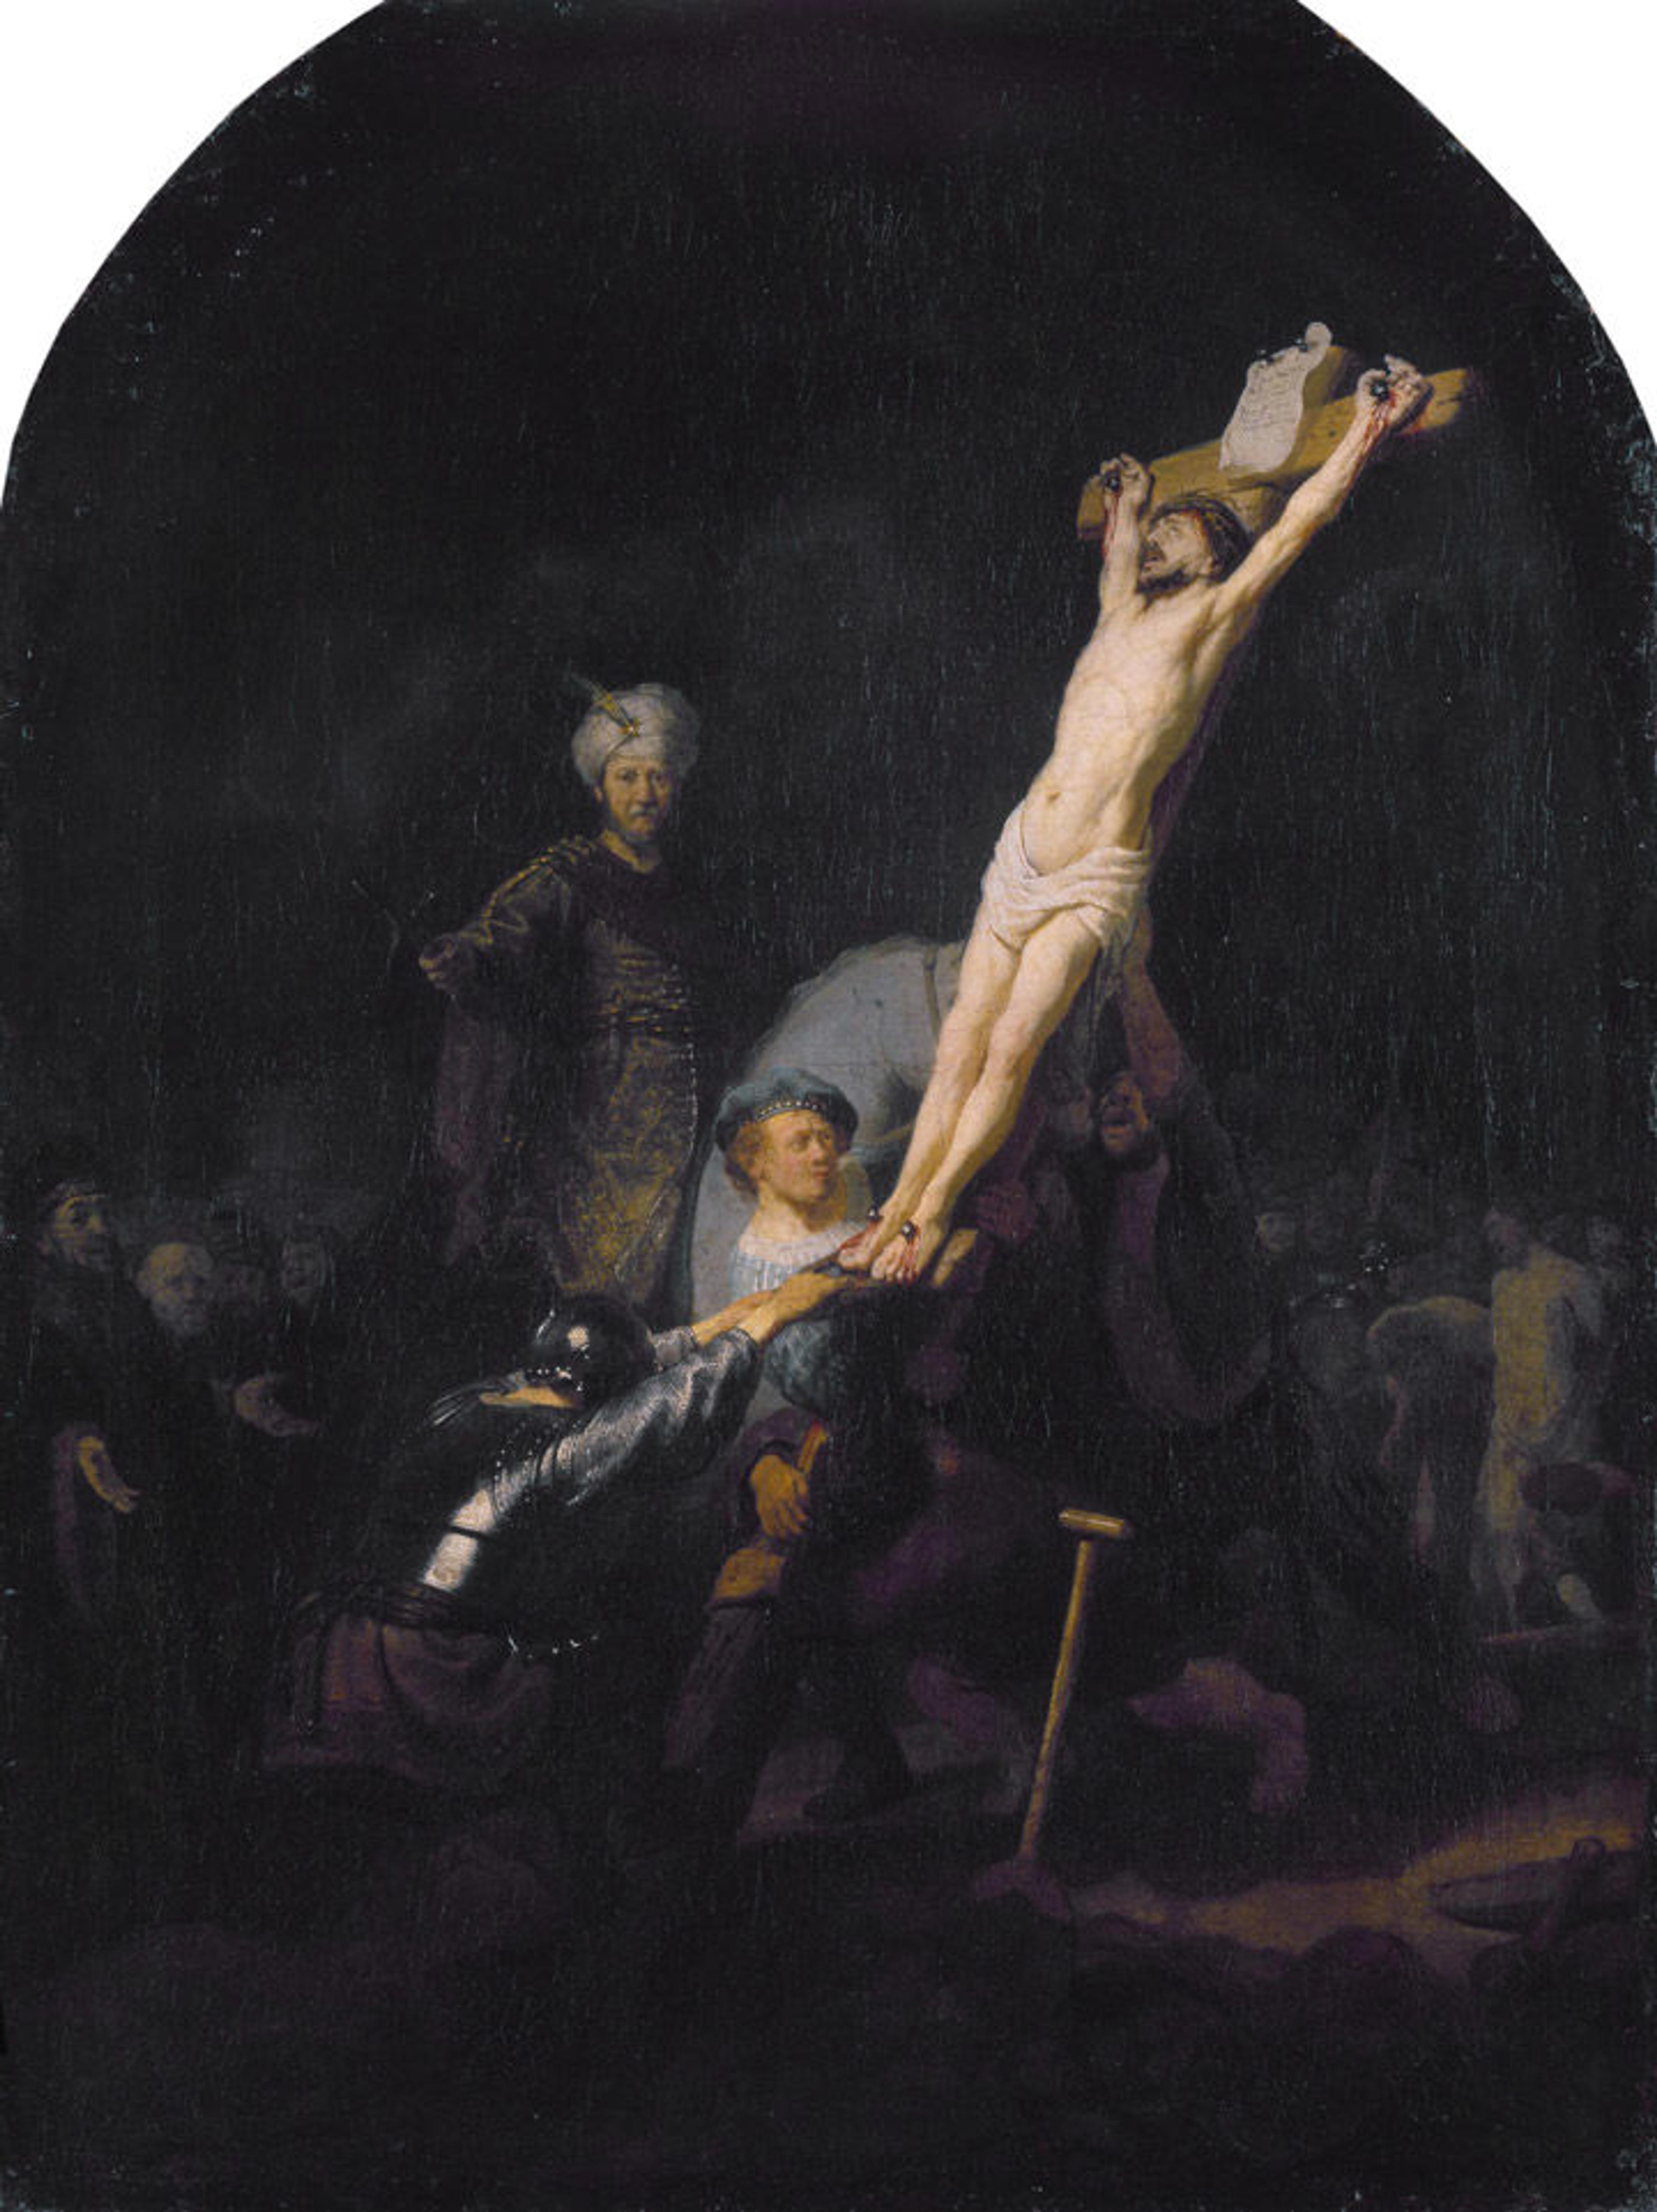 A Rembrandt painting depicting the raising of the cross during Christ's crucifixion, with the artist himself visible in the scene